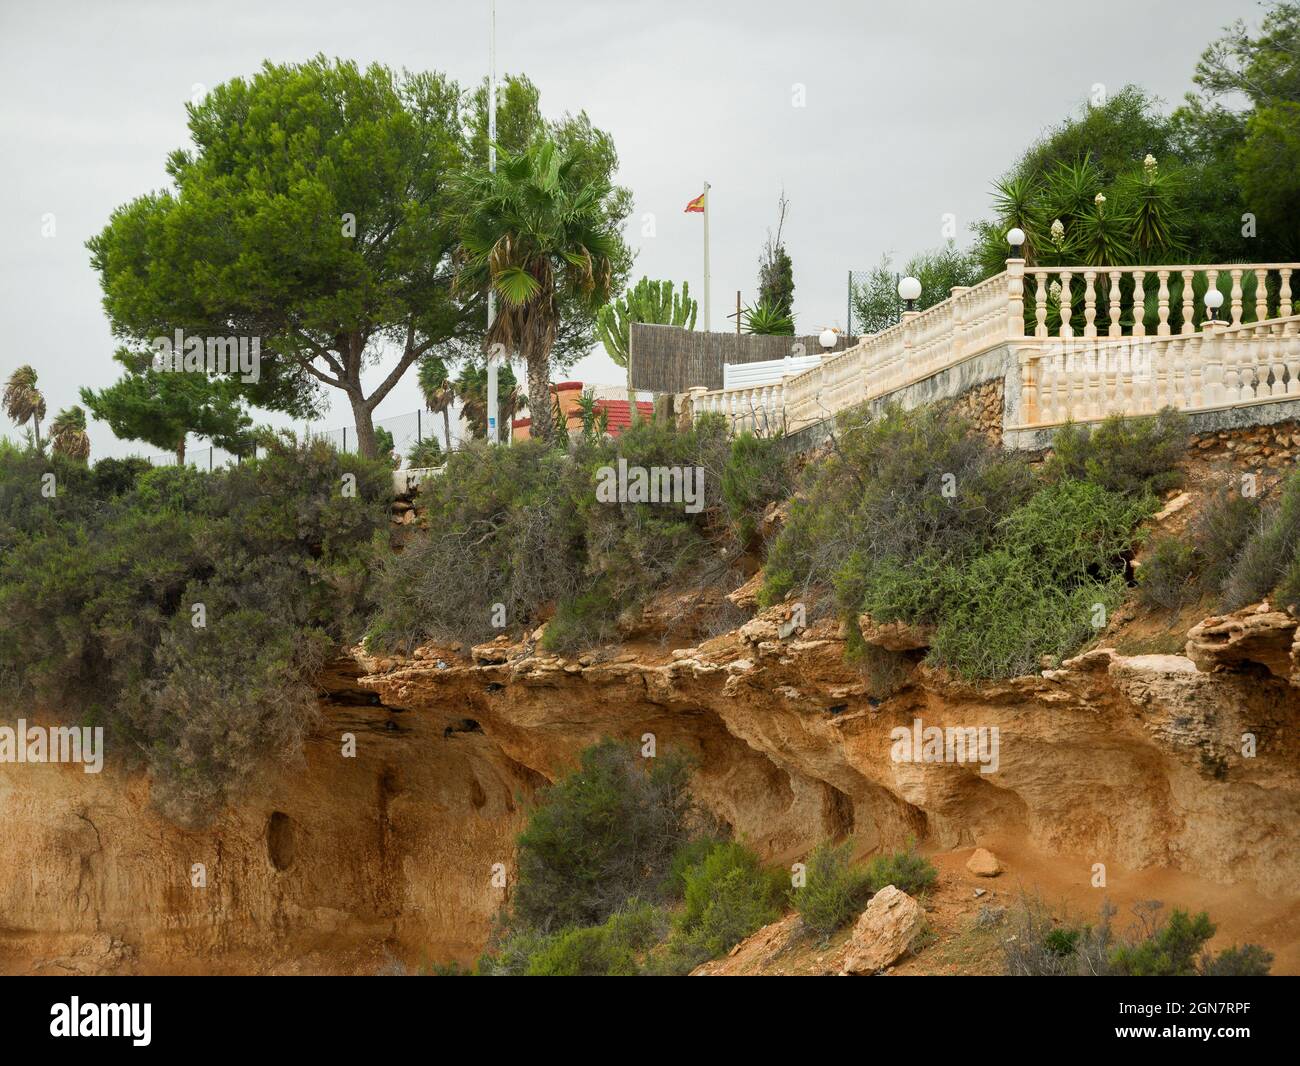 The sandstone cliffs undermined by coastal erosion at Cabo Roig, Costa Blanca, Spain, Stock Photo